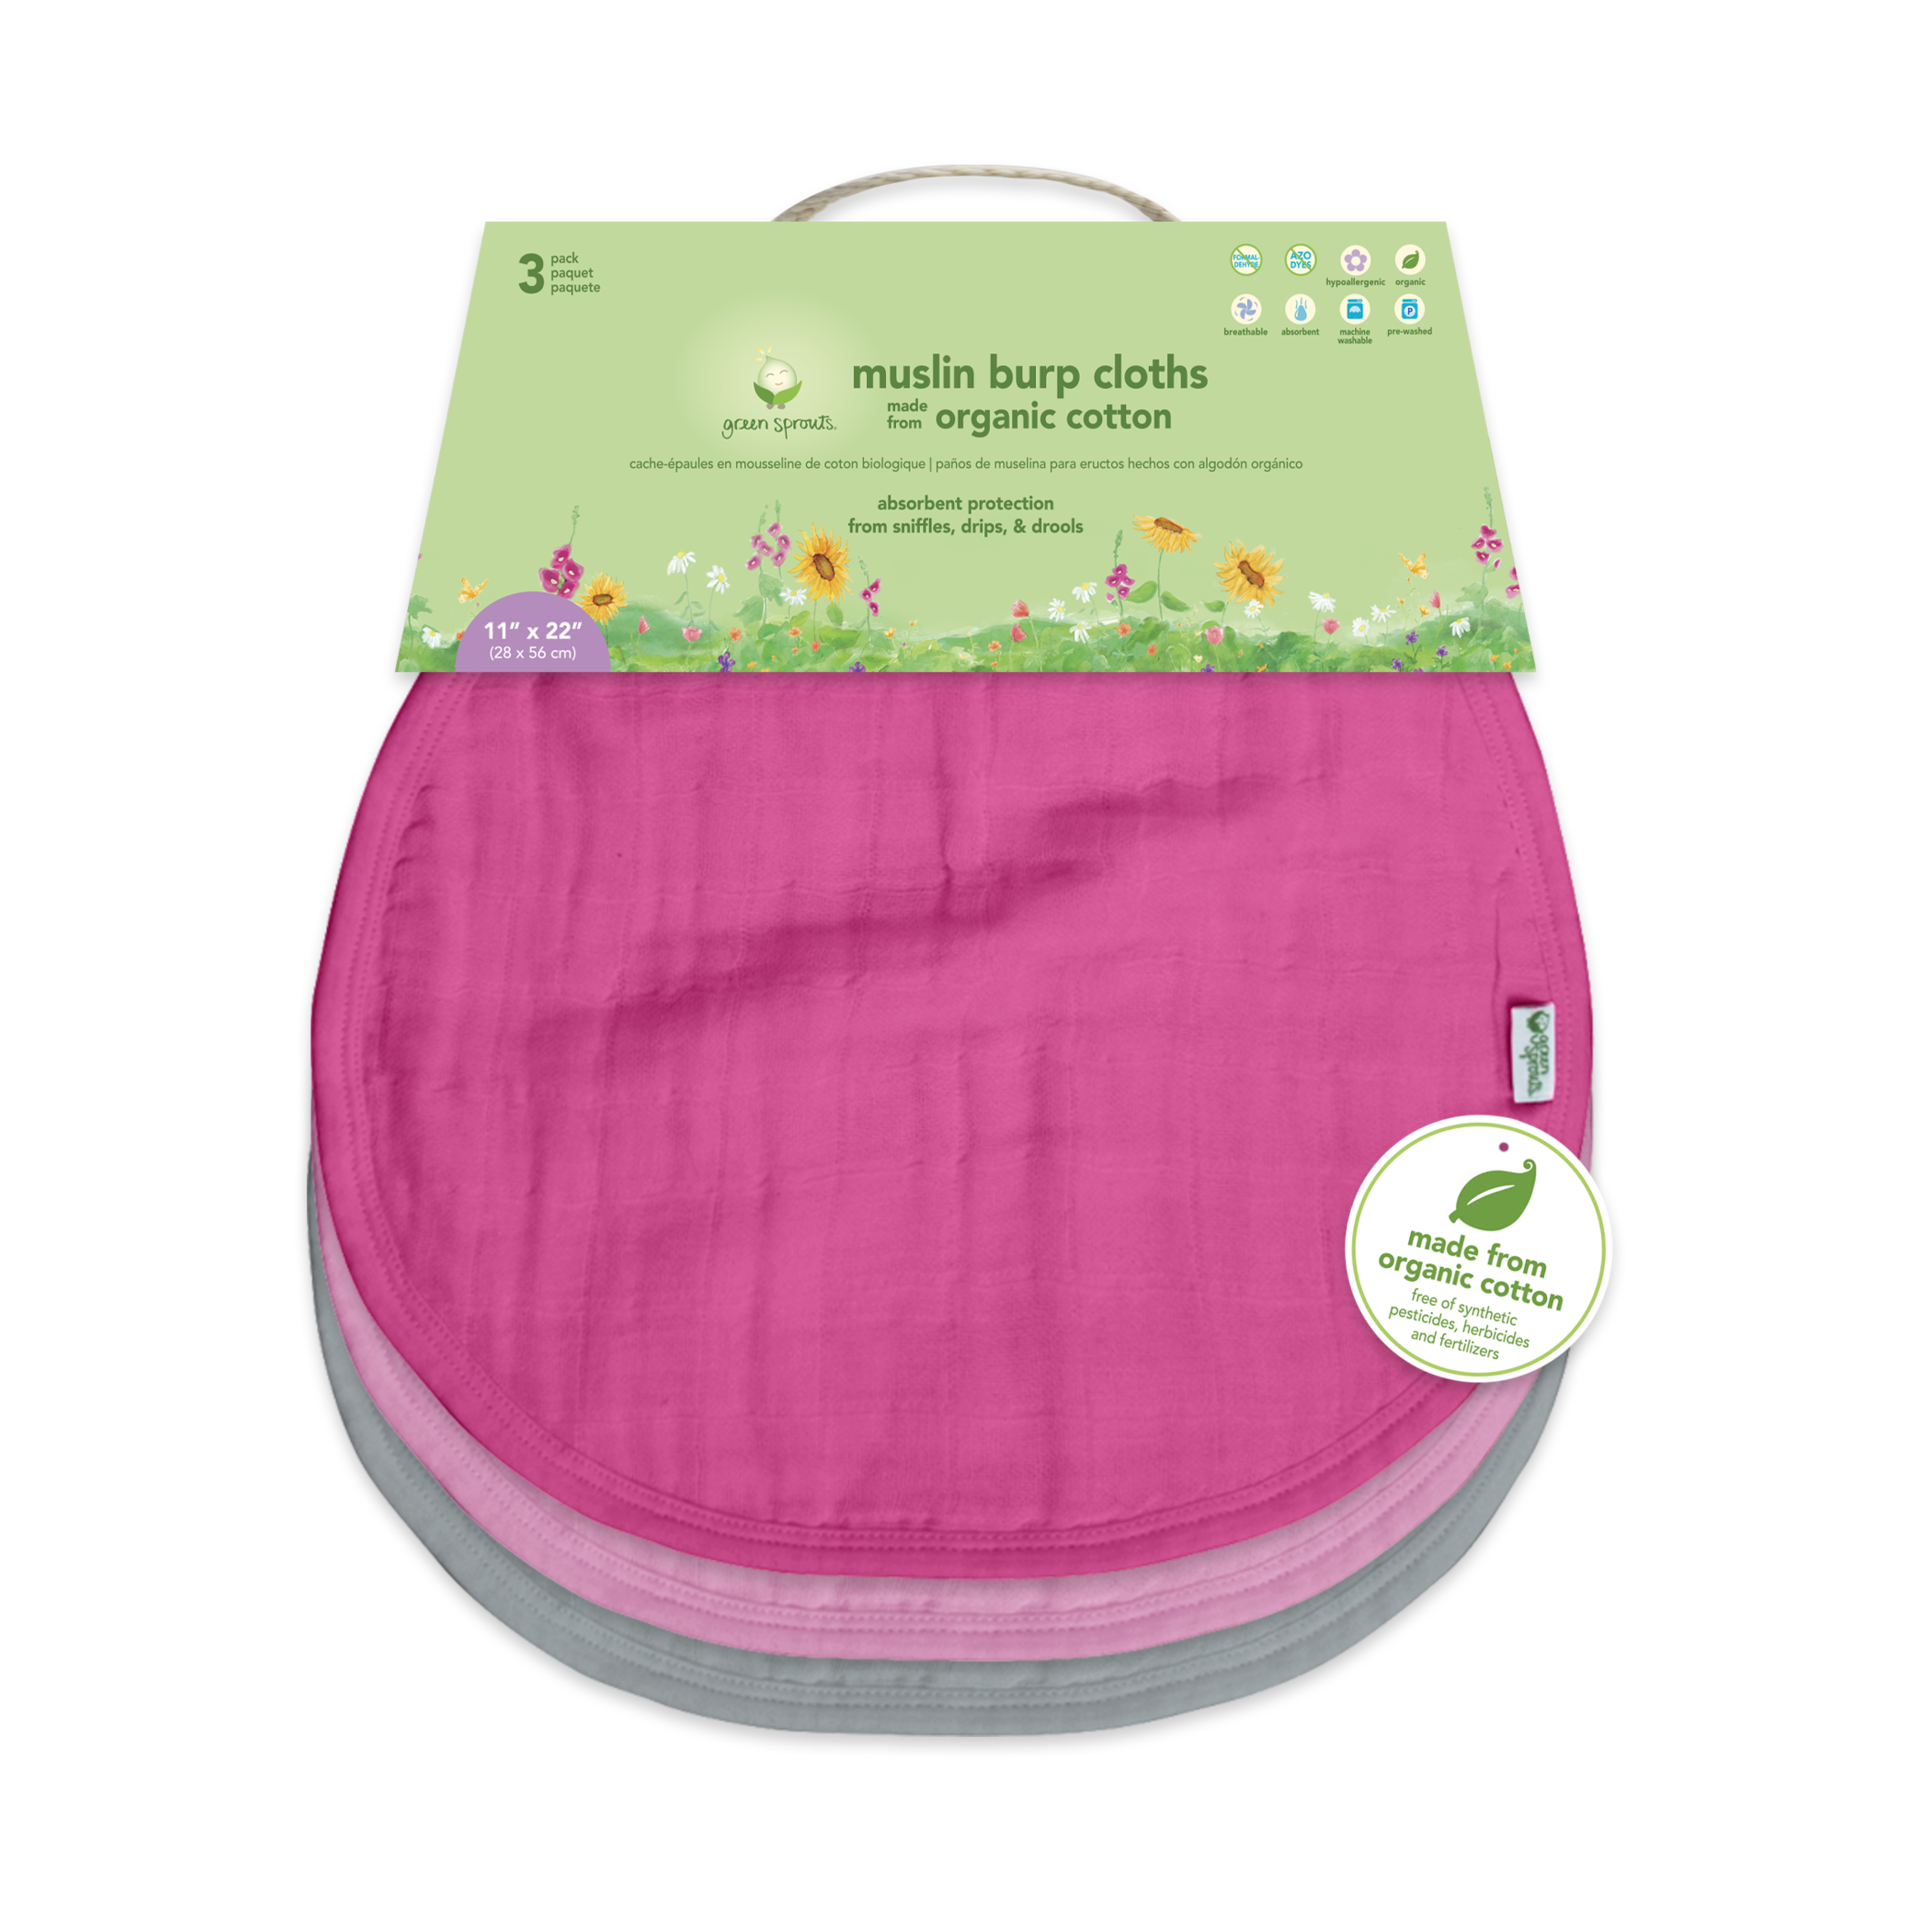 green sprouts muslin burp cloths made from organic cotton